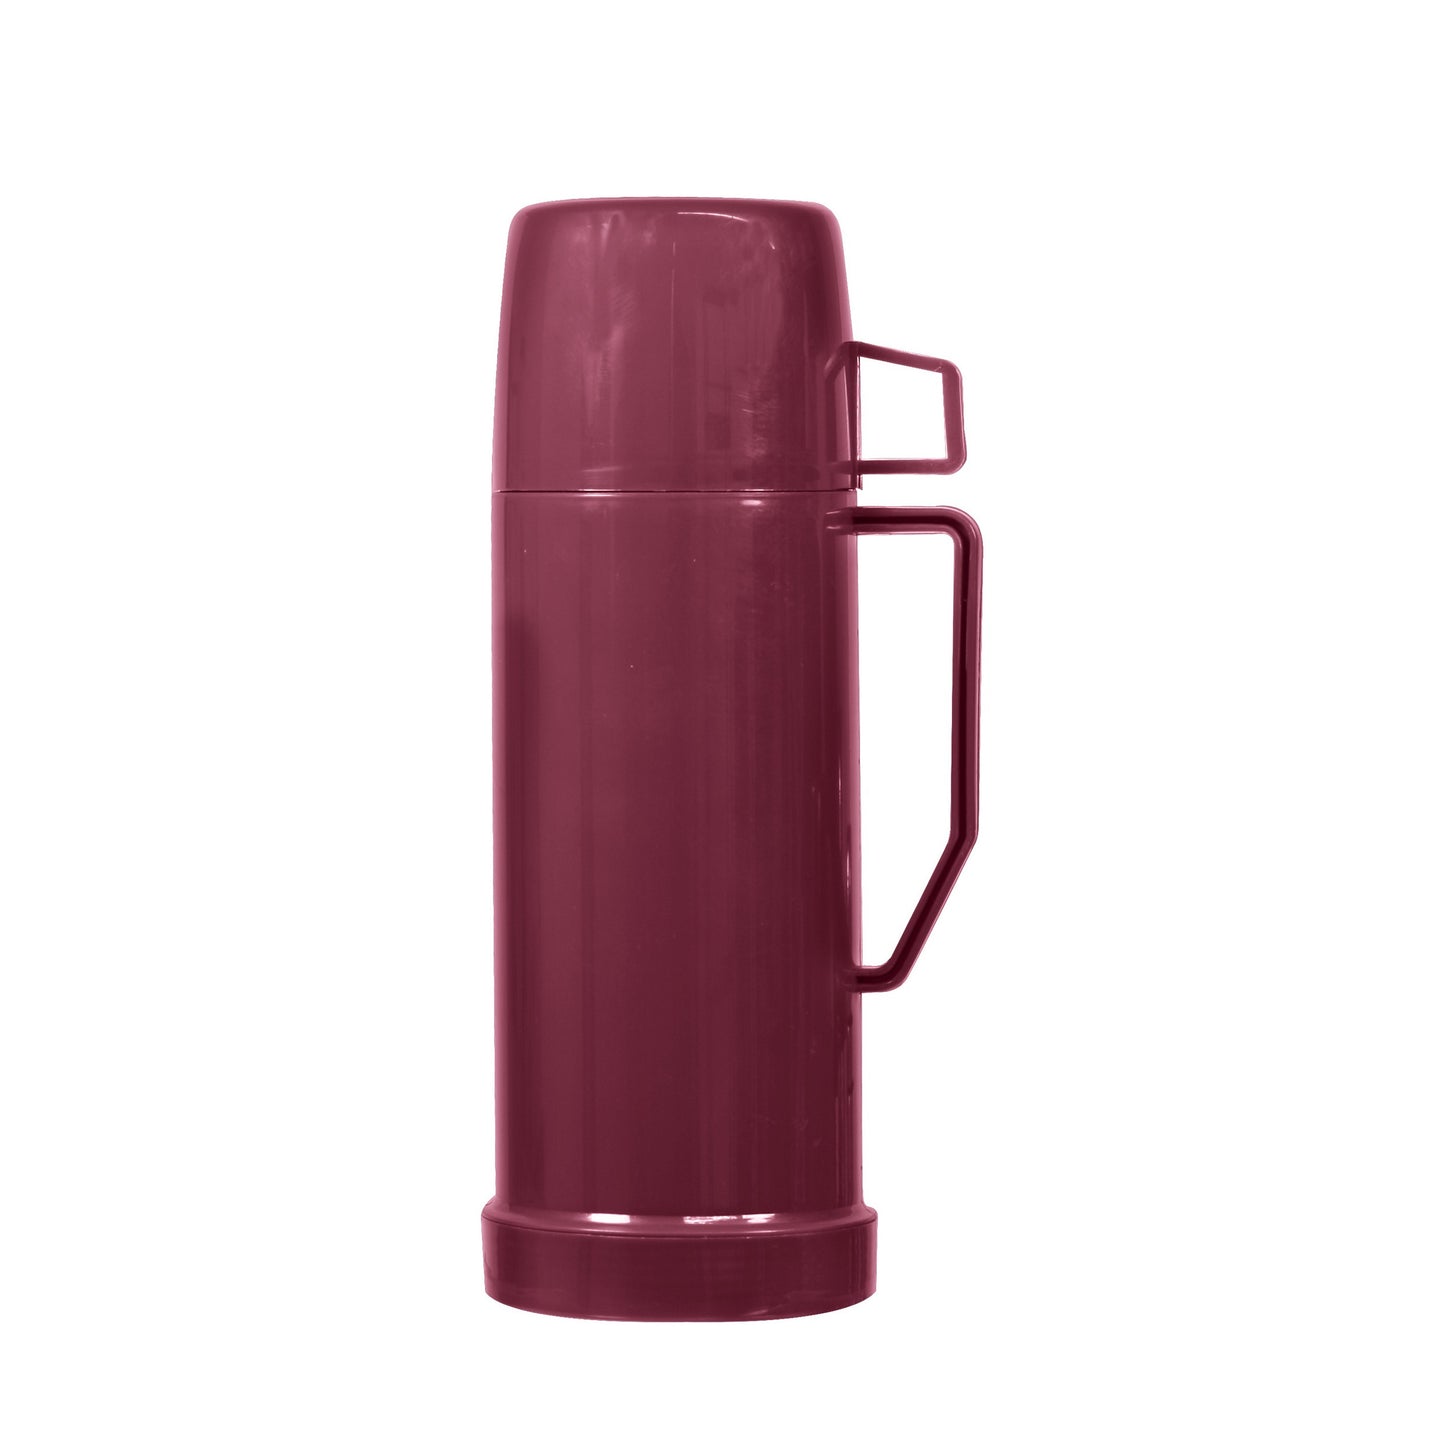 
                  
                    16oz Bene Casa Thermos with double wall vacuum insulation, 0.5-liter capacity thermos, blue red or green thermos keeps drinks hot or cold for hours
                  
                